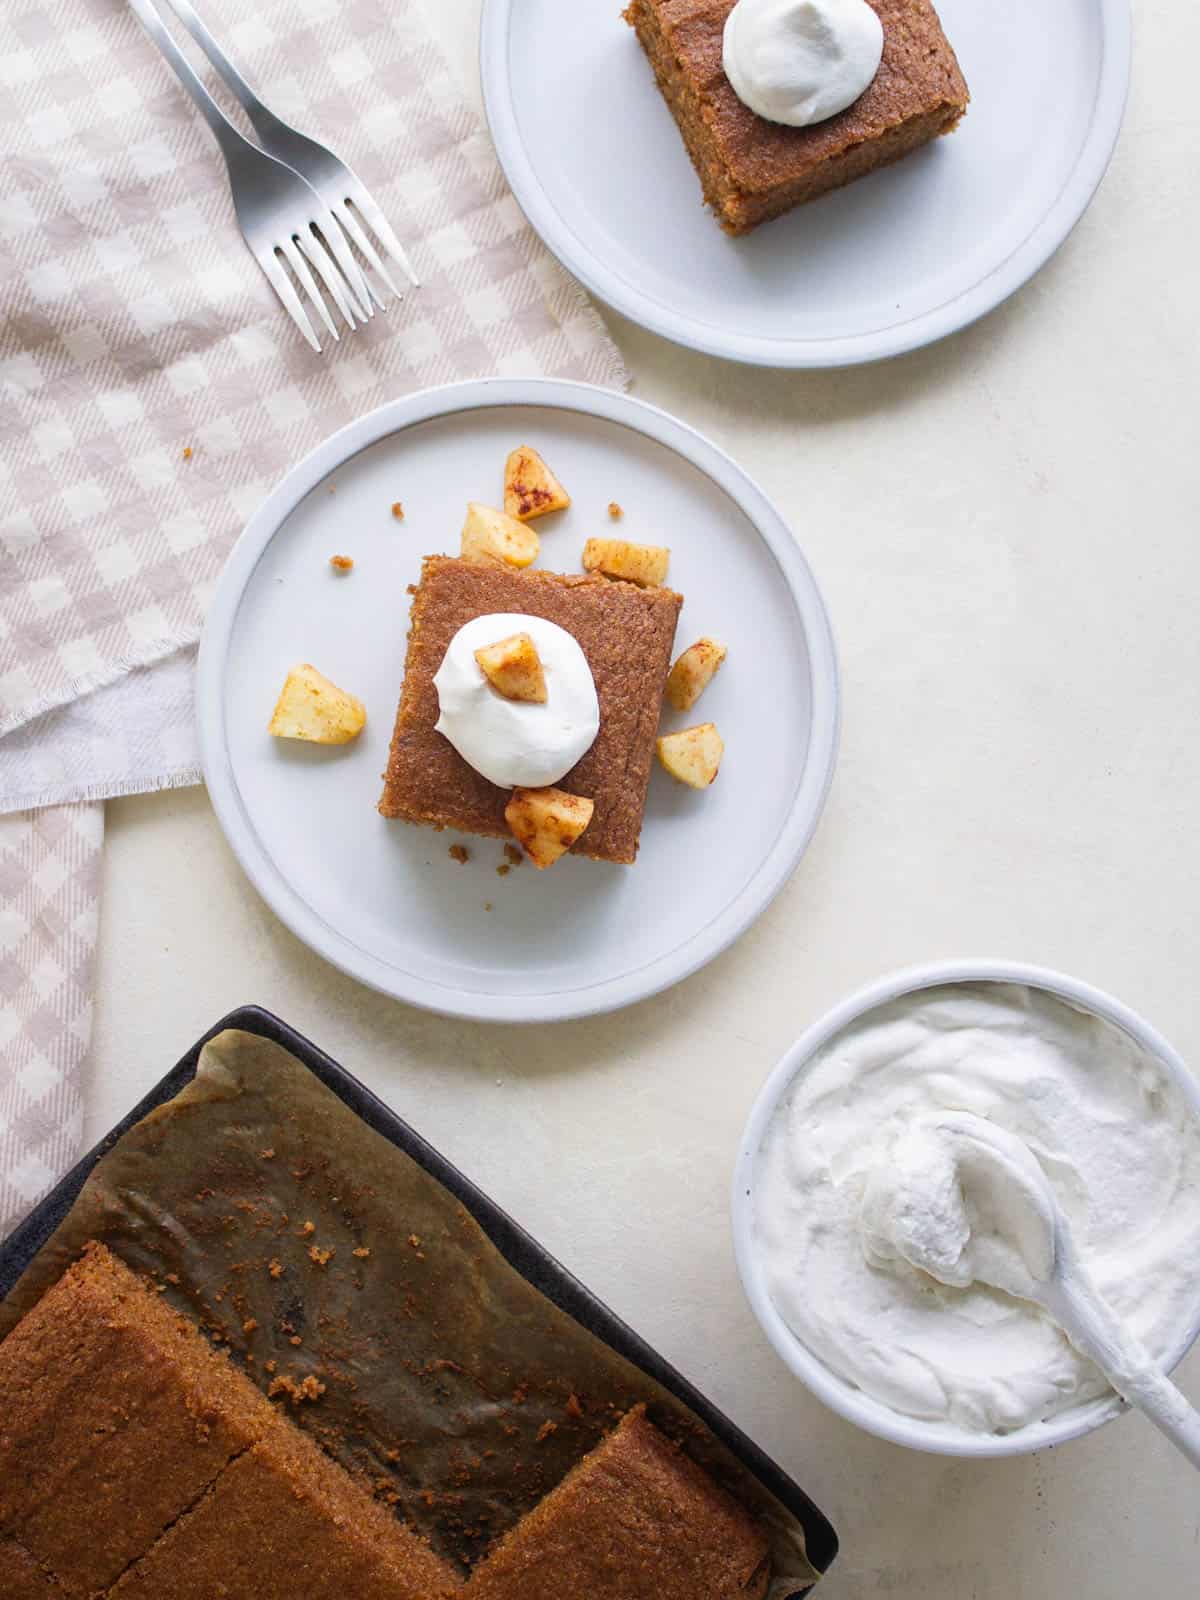 A slice of applesauce cake on a plate with whipped cream and cinnamon apples.